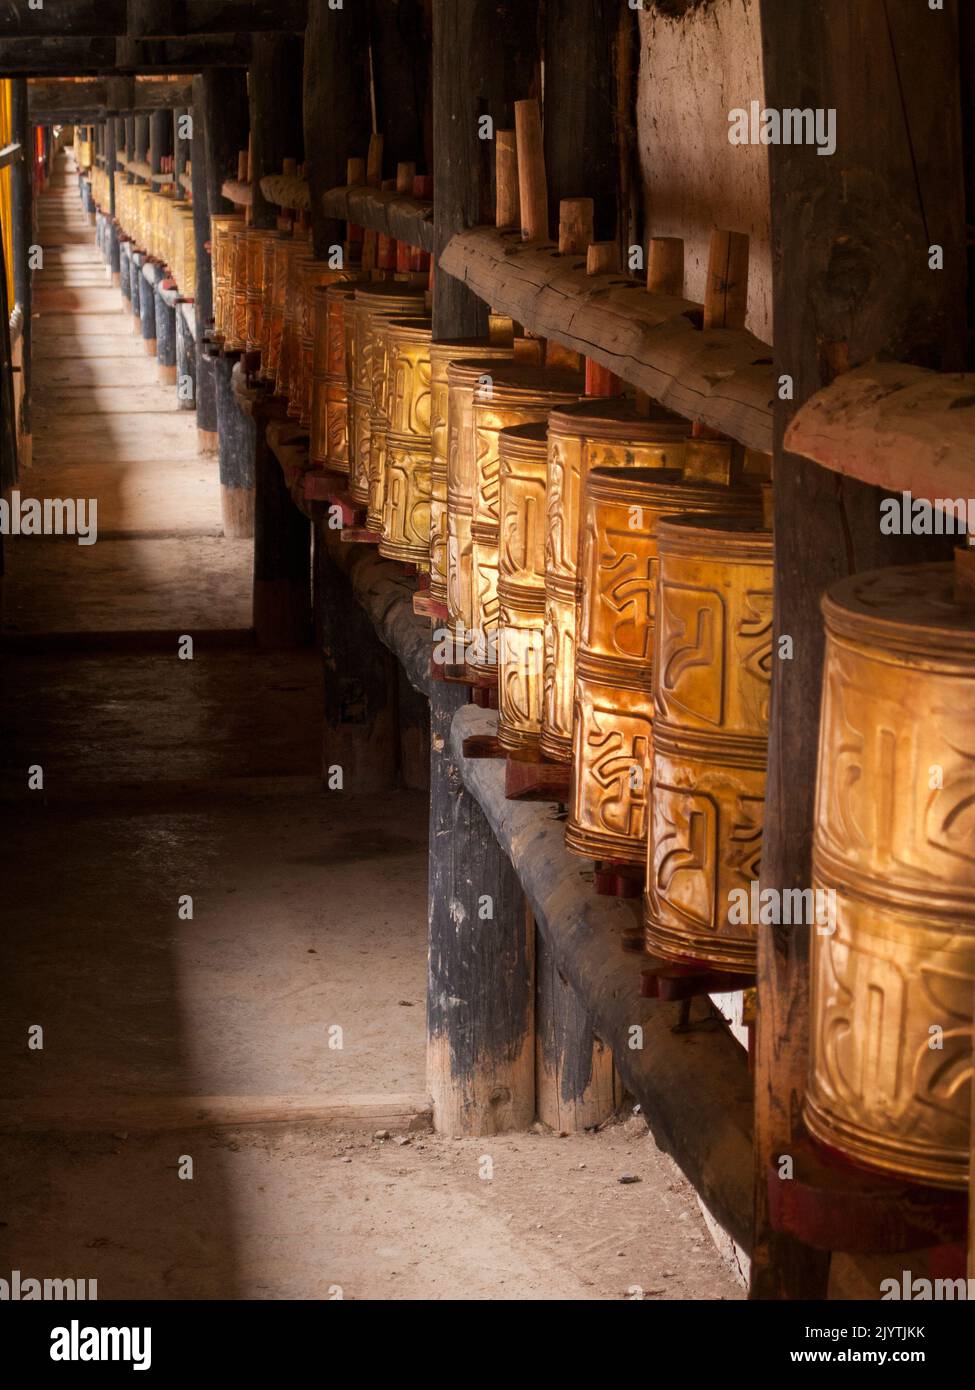 Buddhist prayer wheels used to practice Tibetan Buddhism in China, at a local temple in a village outside Songpan ancient town in northern Sichuan province, China. PRC. (126) Stock Photo